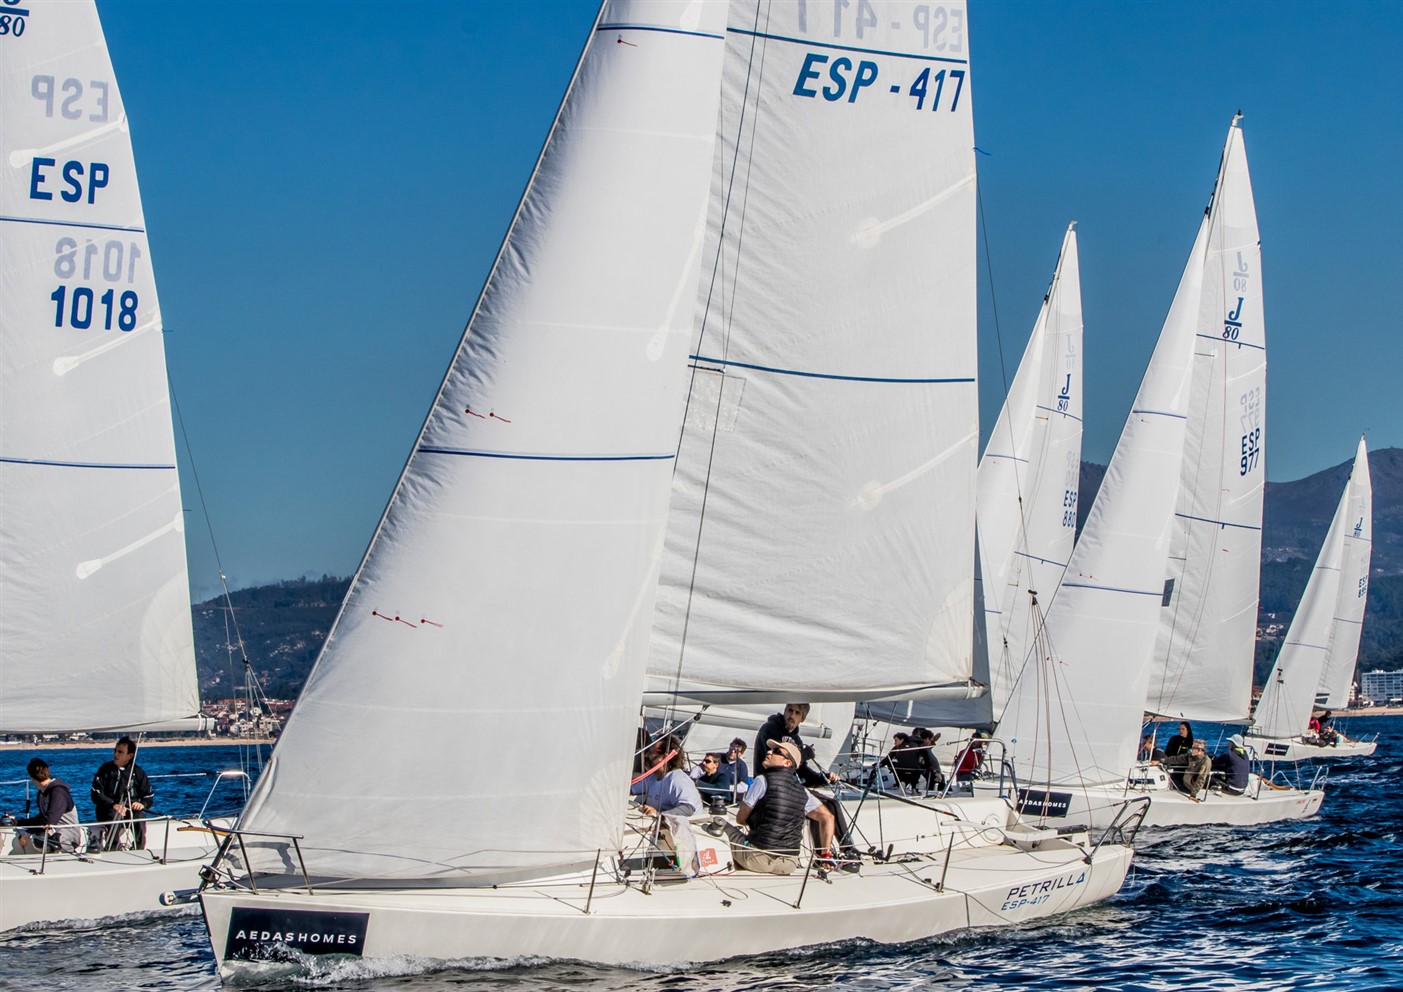 The J80 will play for the championship title this weekend in Baiona